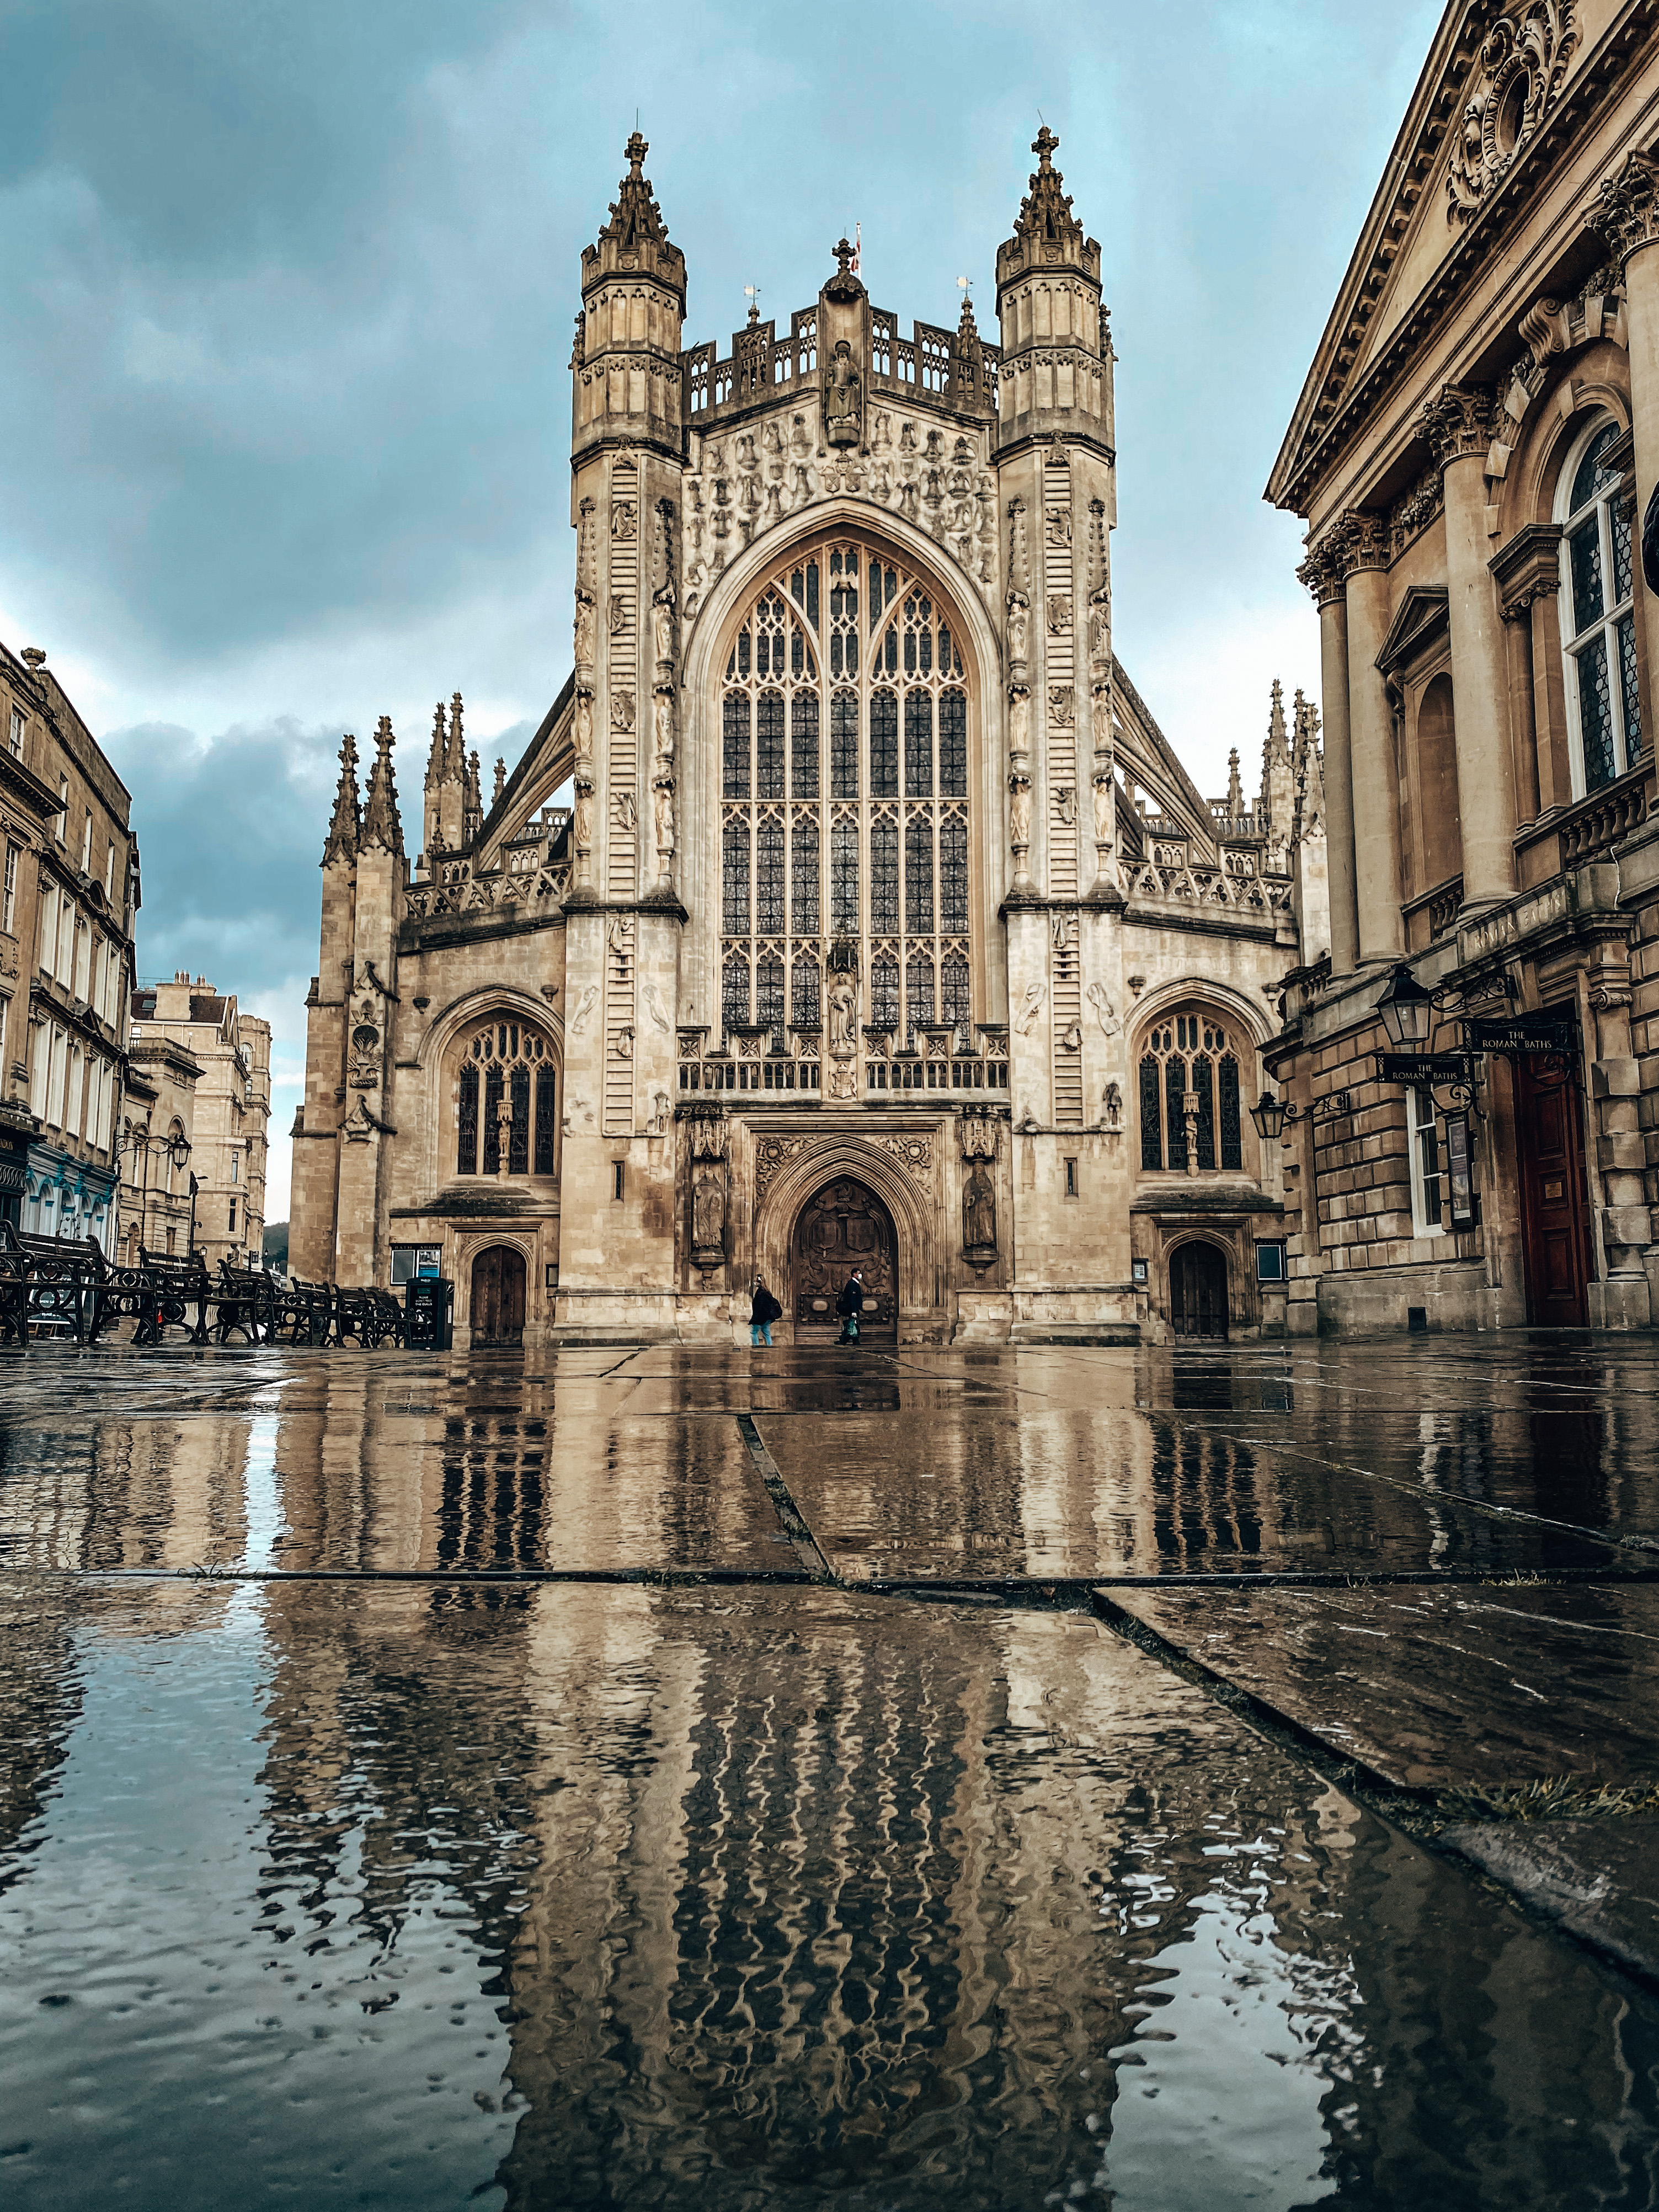 A church in Bath, England reflected in the rain on the ground below.